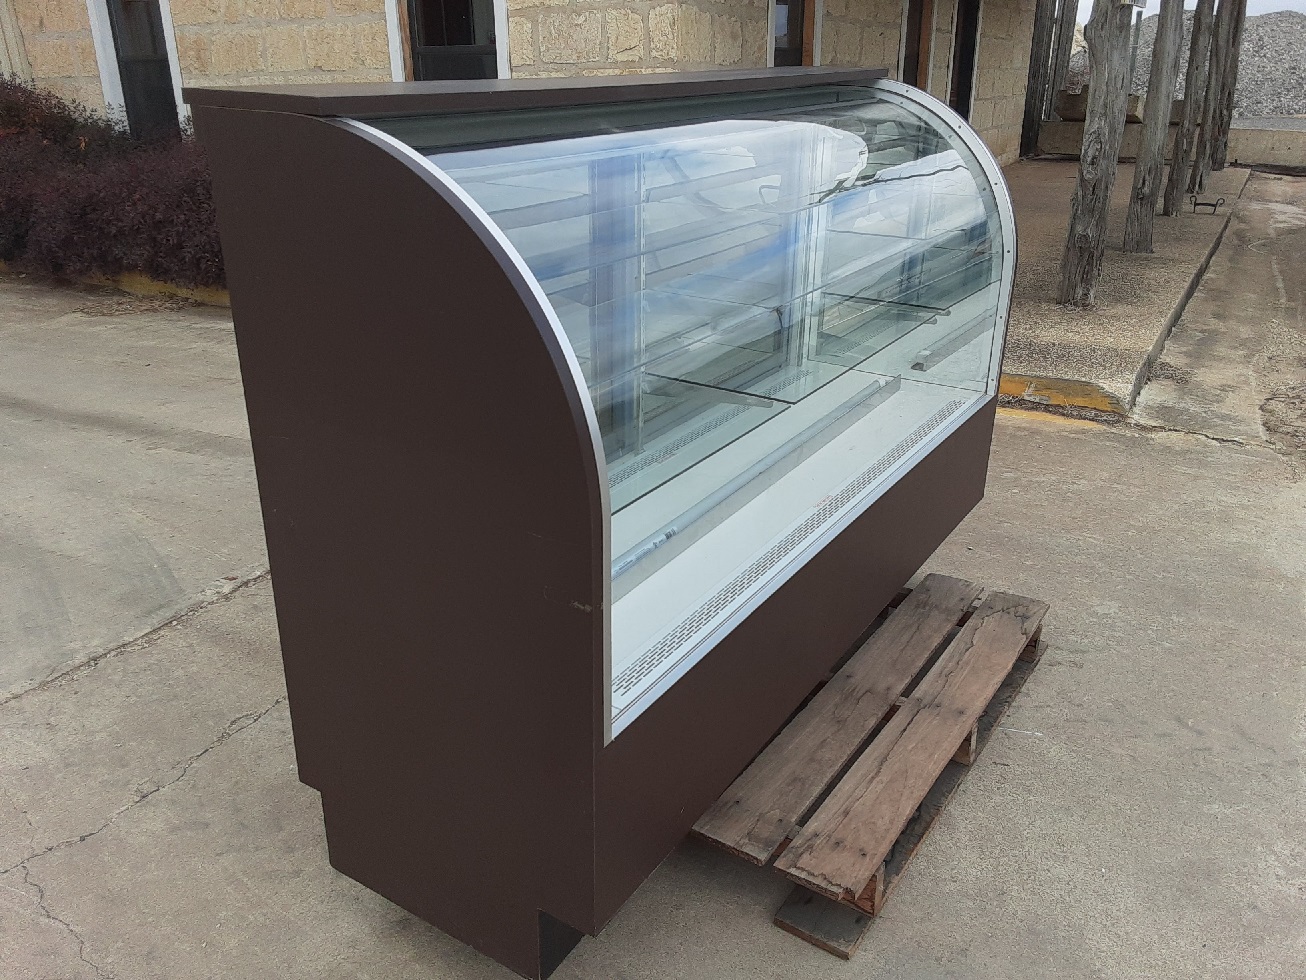 2015 72" Alternative Air AACCA Pastry Display Unit Refrigerated